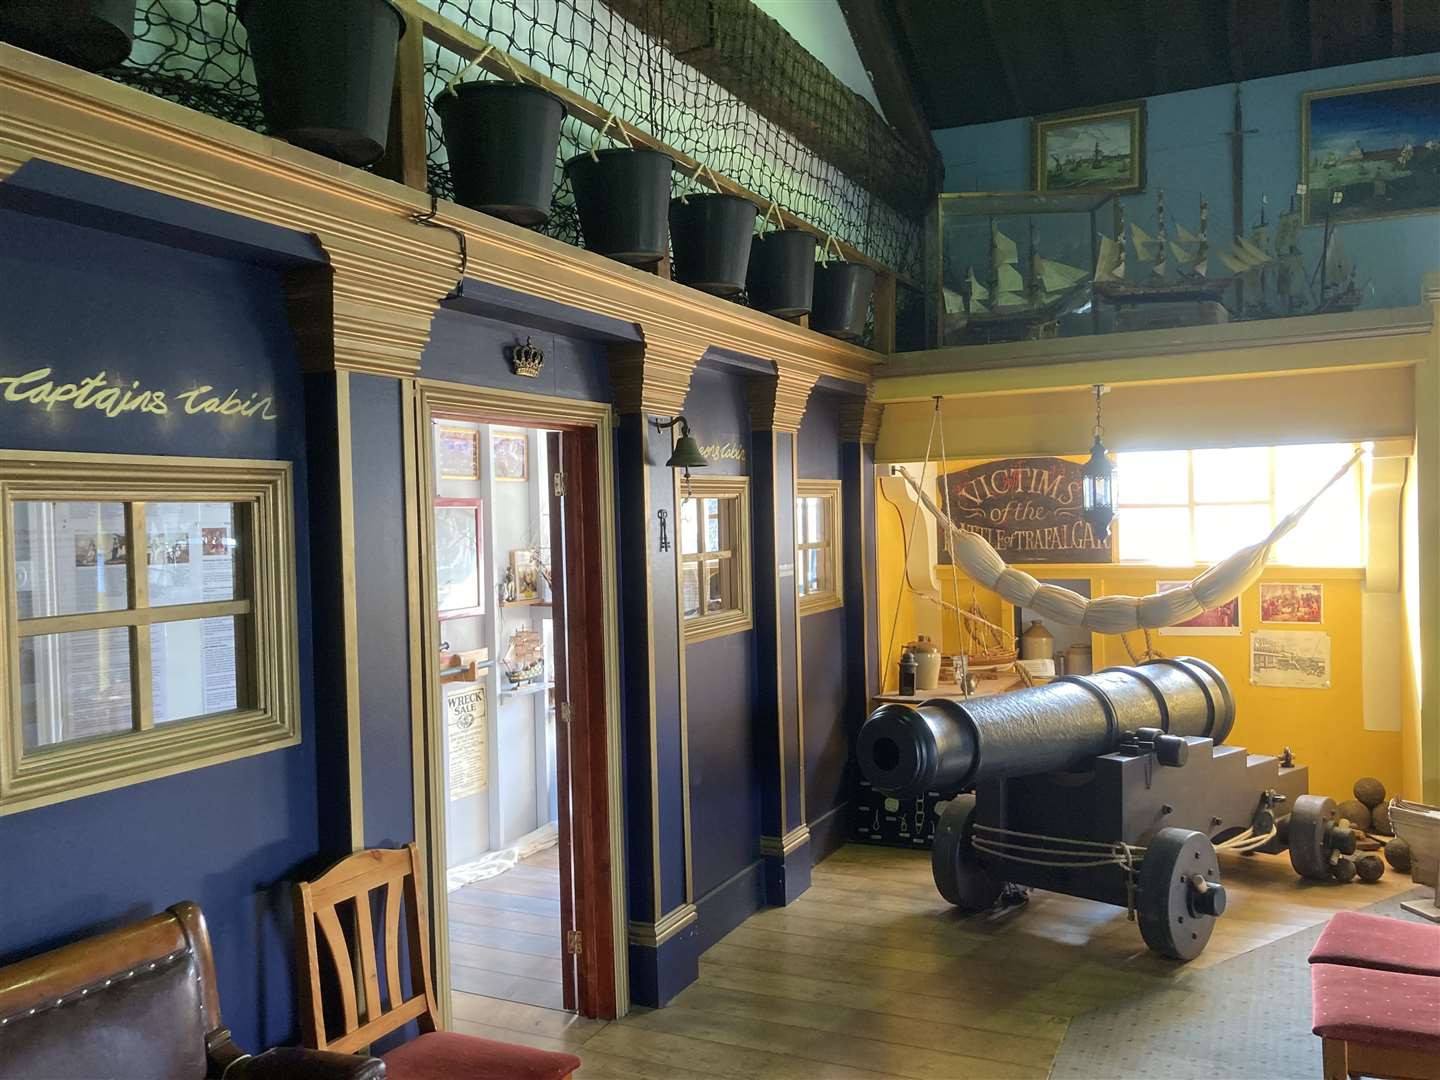 The maritime room at the Blue Town Heritage Centre and Criterion Theatre, Sheerness